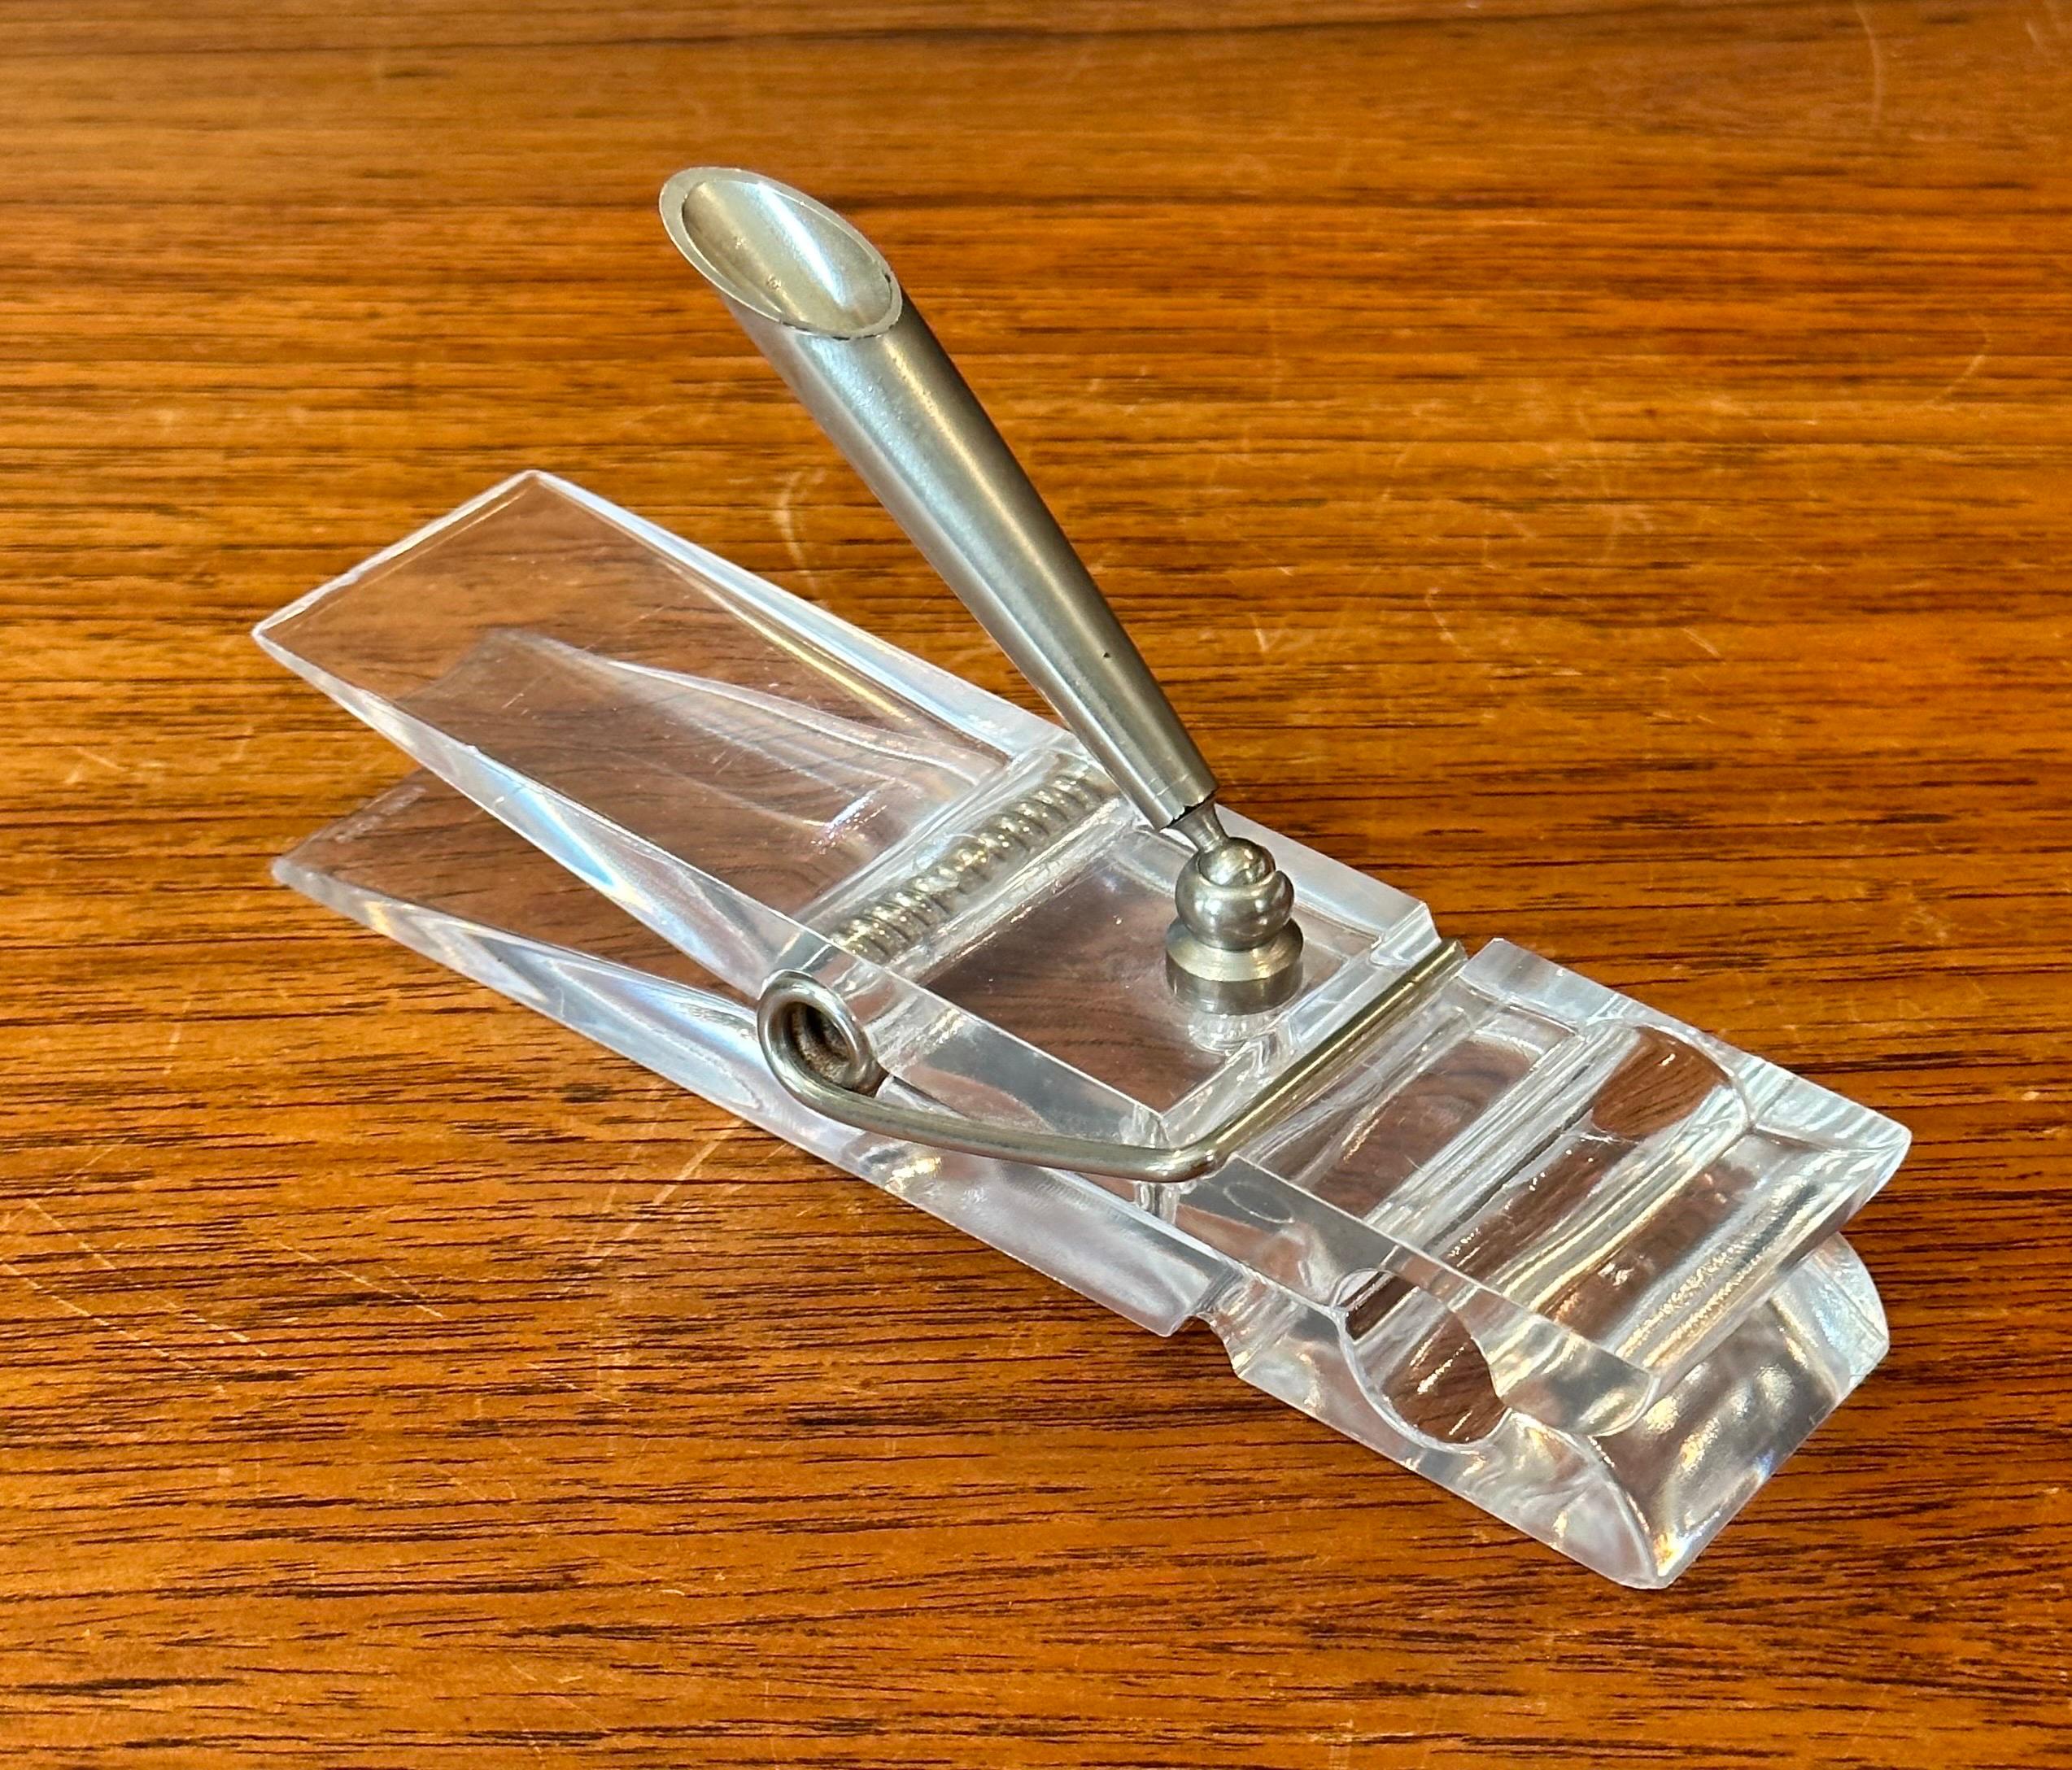 Oversized Lucite Clothespin Paperweight / Pen Holder / Desk Accessory In Good Condition For Sale In San Diego, CA